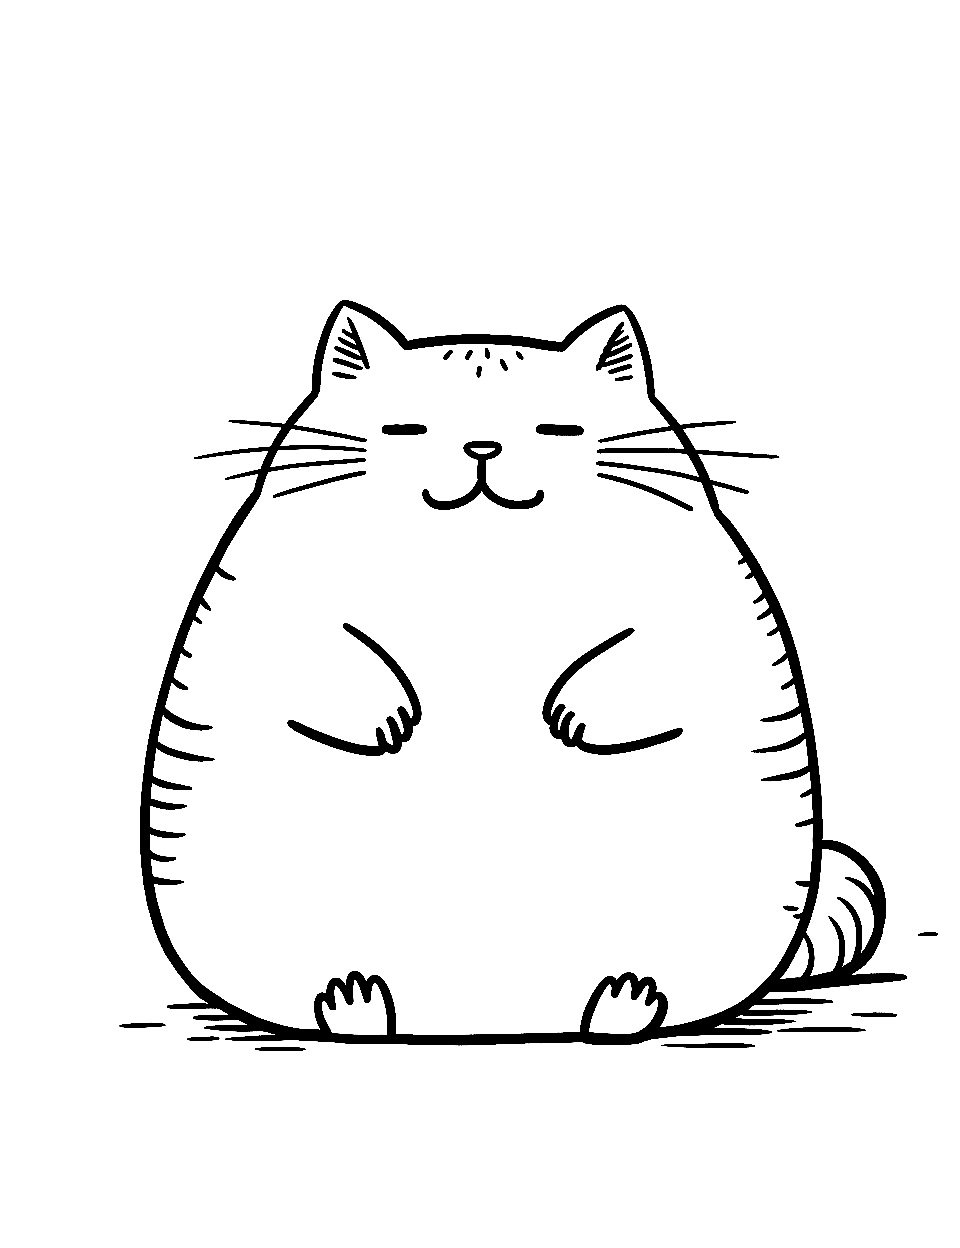 Simple Pleasures Coloring Page - Pusheen sitting with a contented smile, tail curled around her.